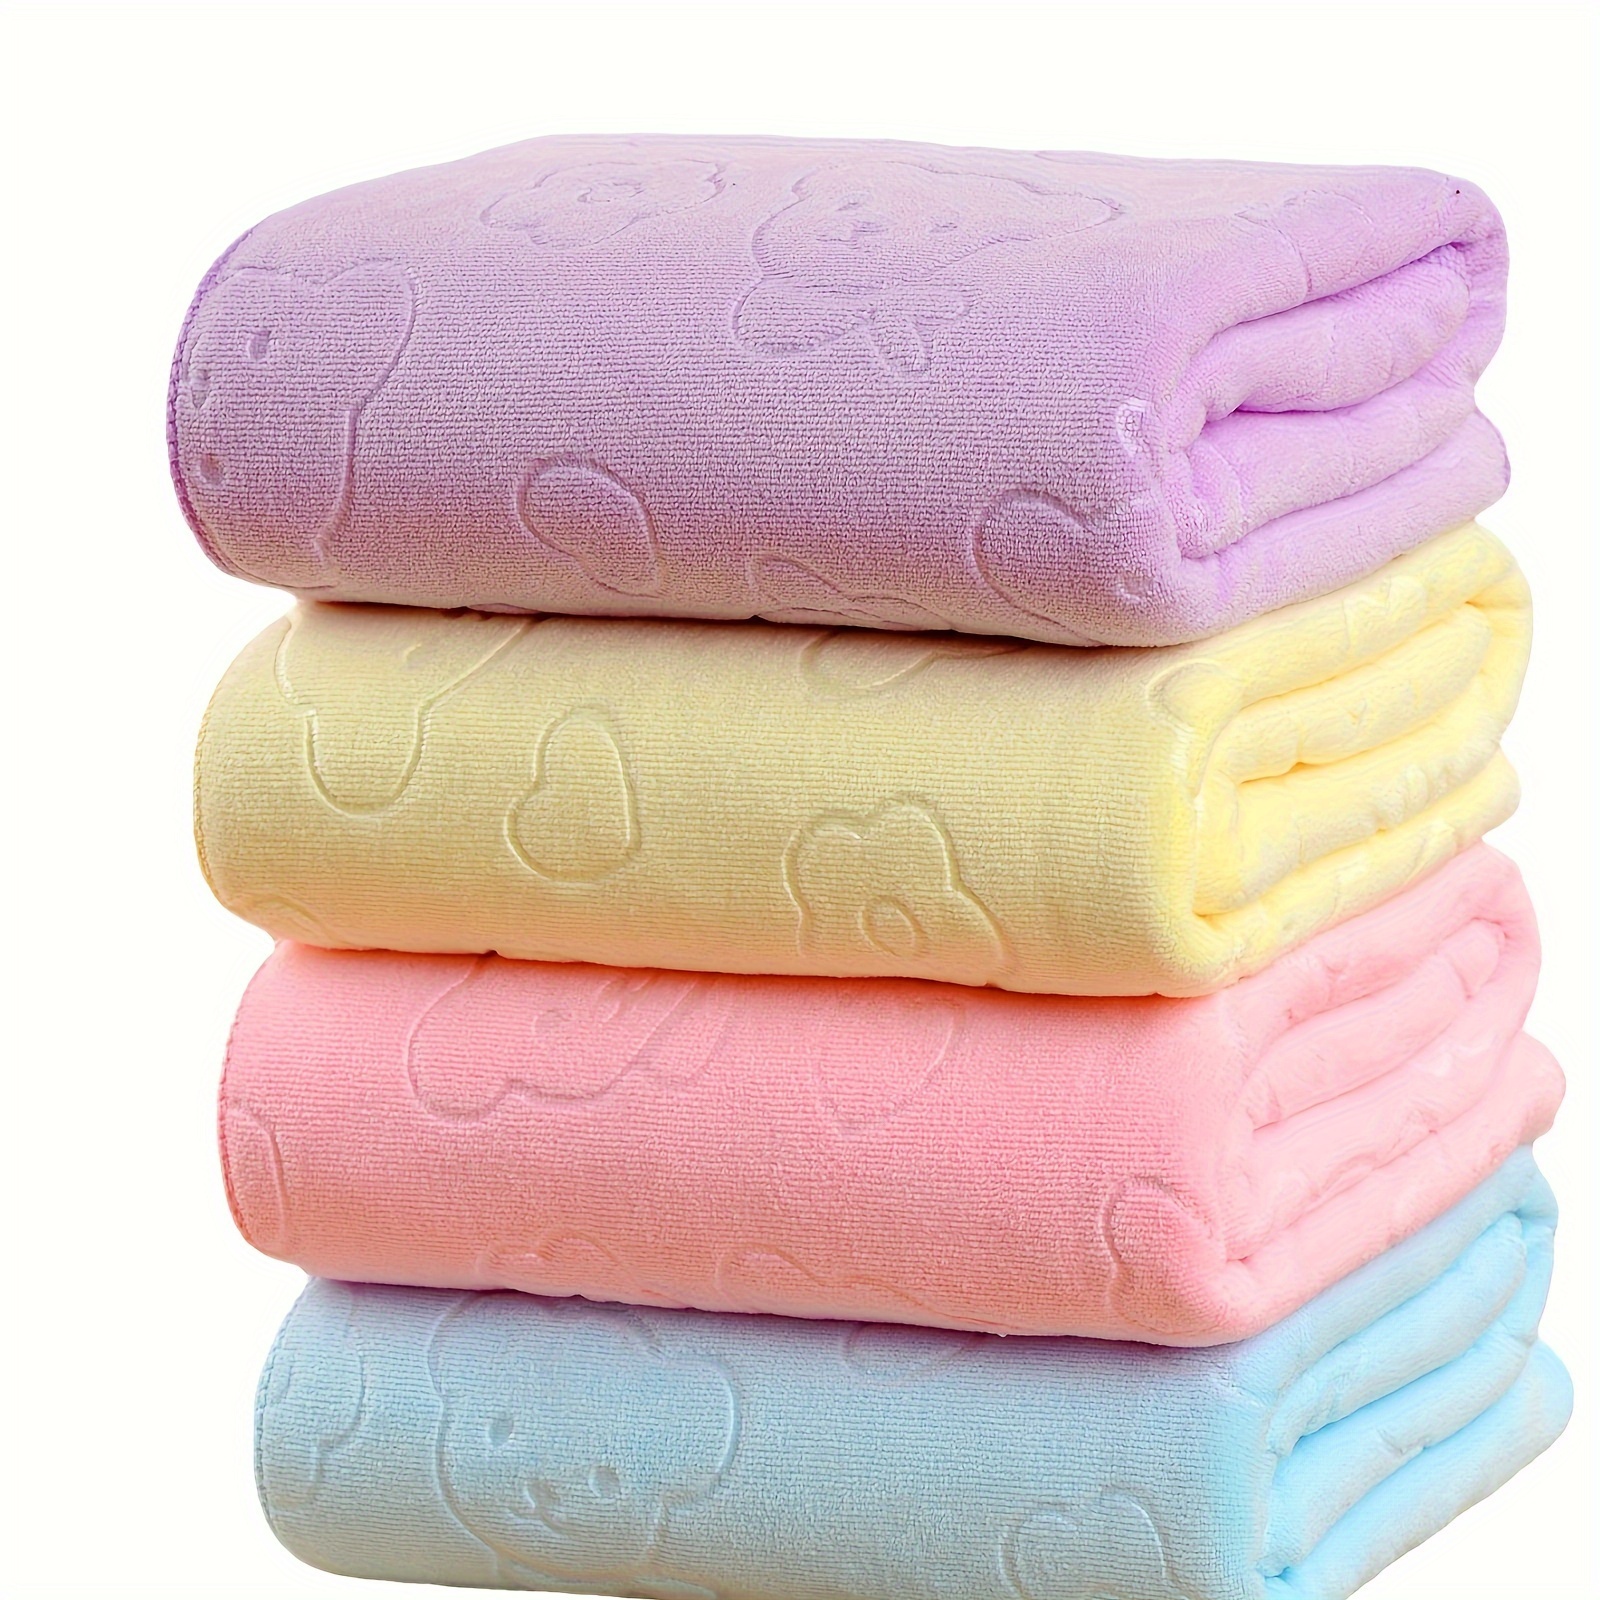 

1 Piece Microfiber Embossed Bear Bath Towel 27.6 Inches * 55.1 Inches Beach Towel Absorbent Soft Non-shedding Non-fading Gift Bath Towel